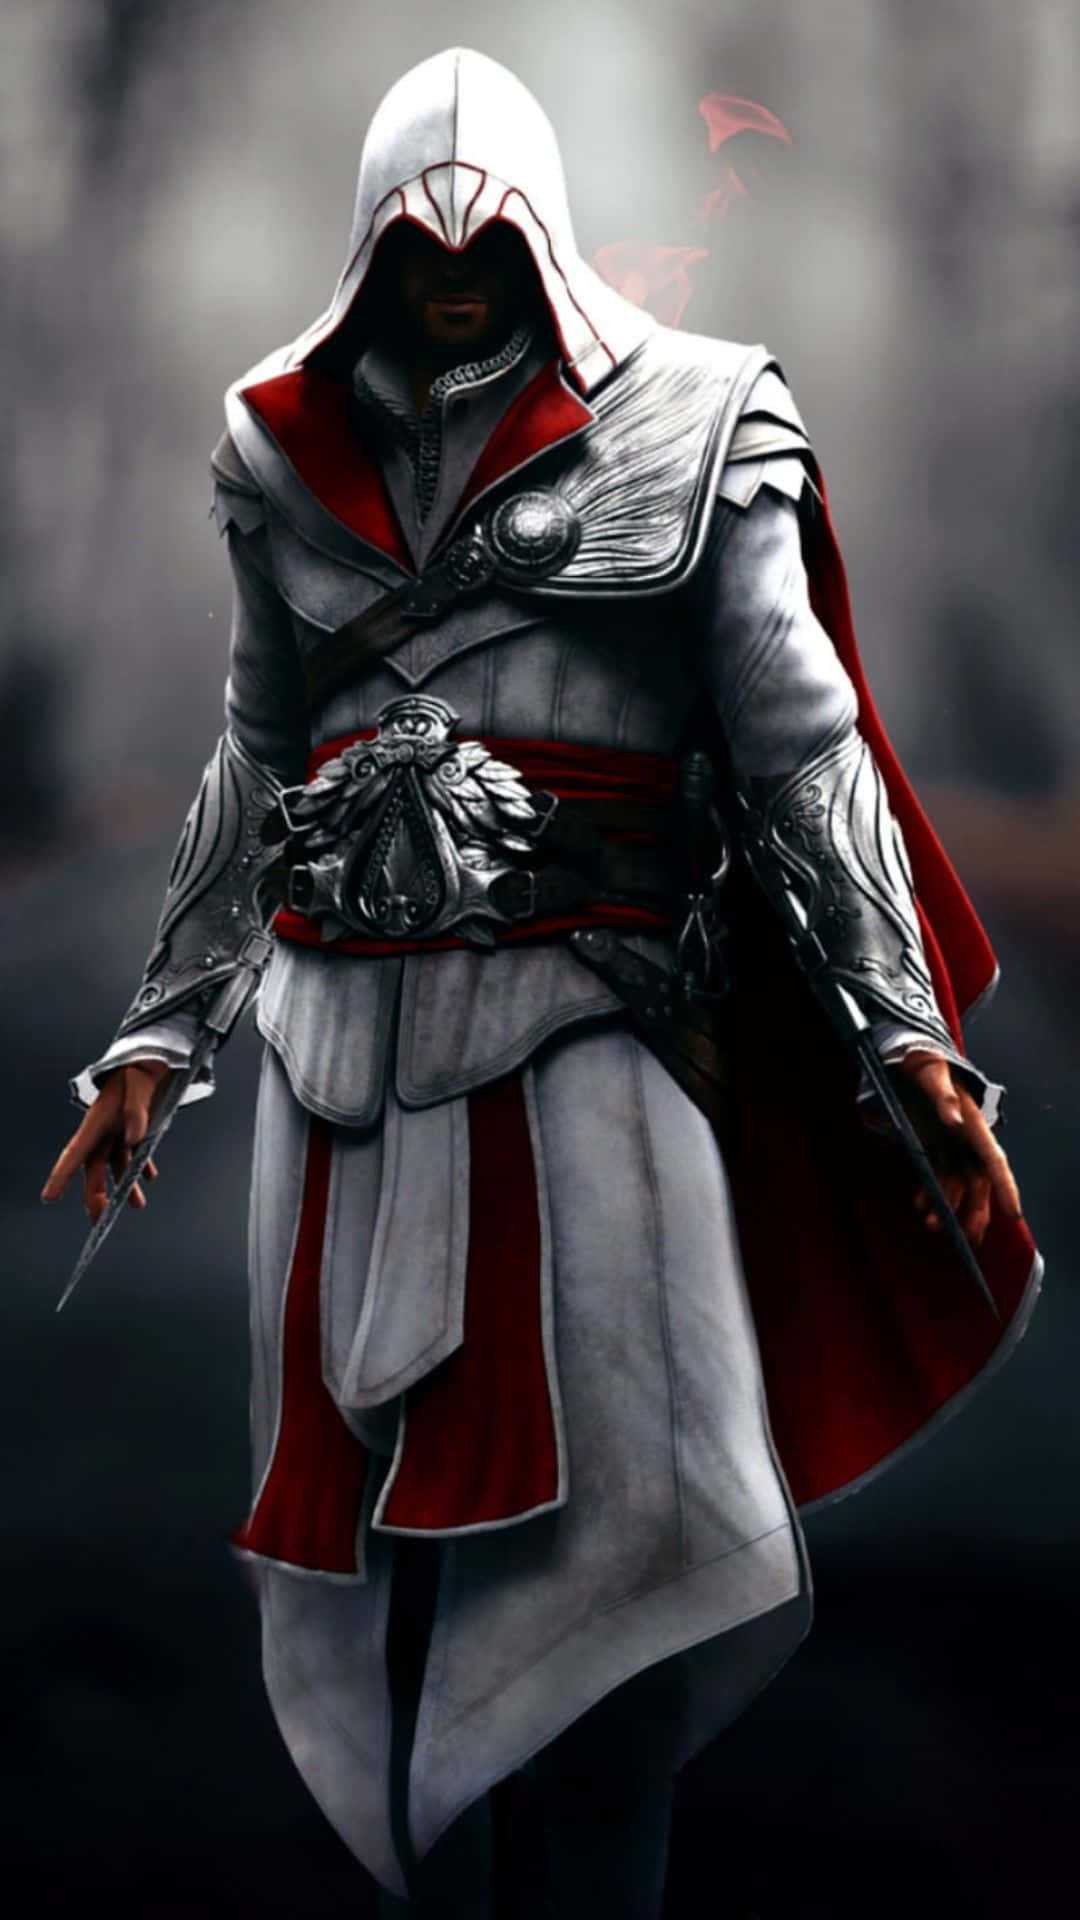 Assassin's Creed characters in action Wallpaper